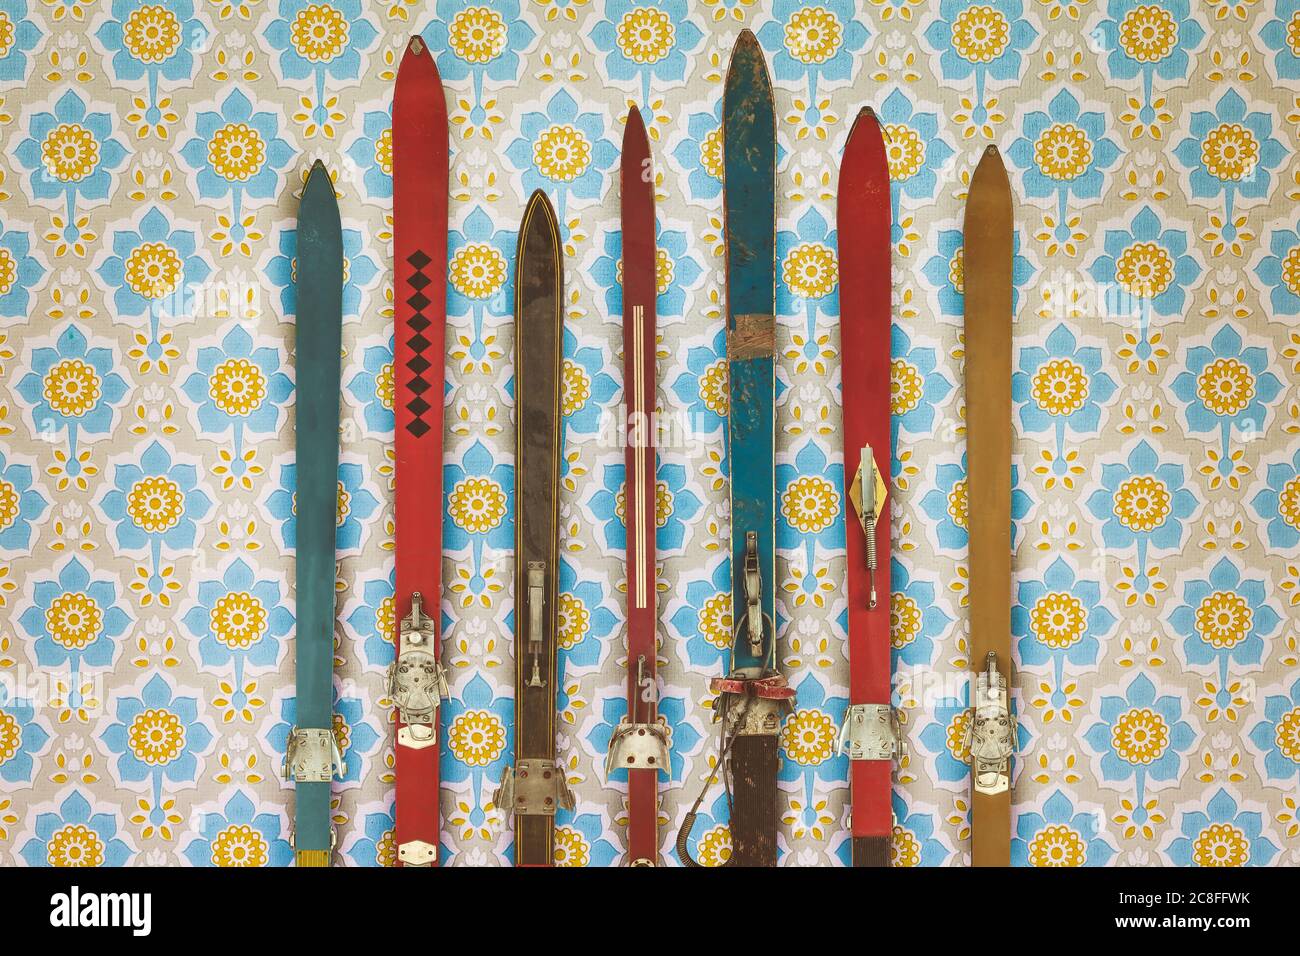 Vintage colorful used skis in front of retro flower wallpaper Stock Photo